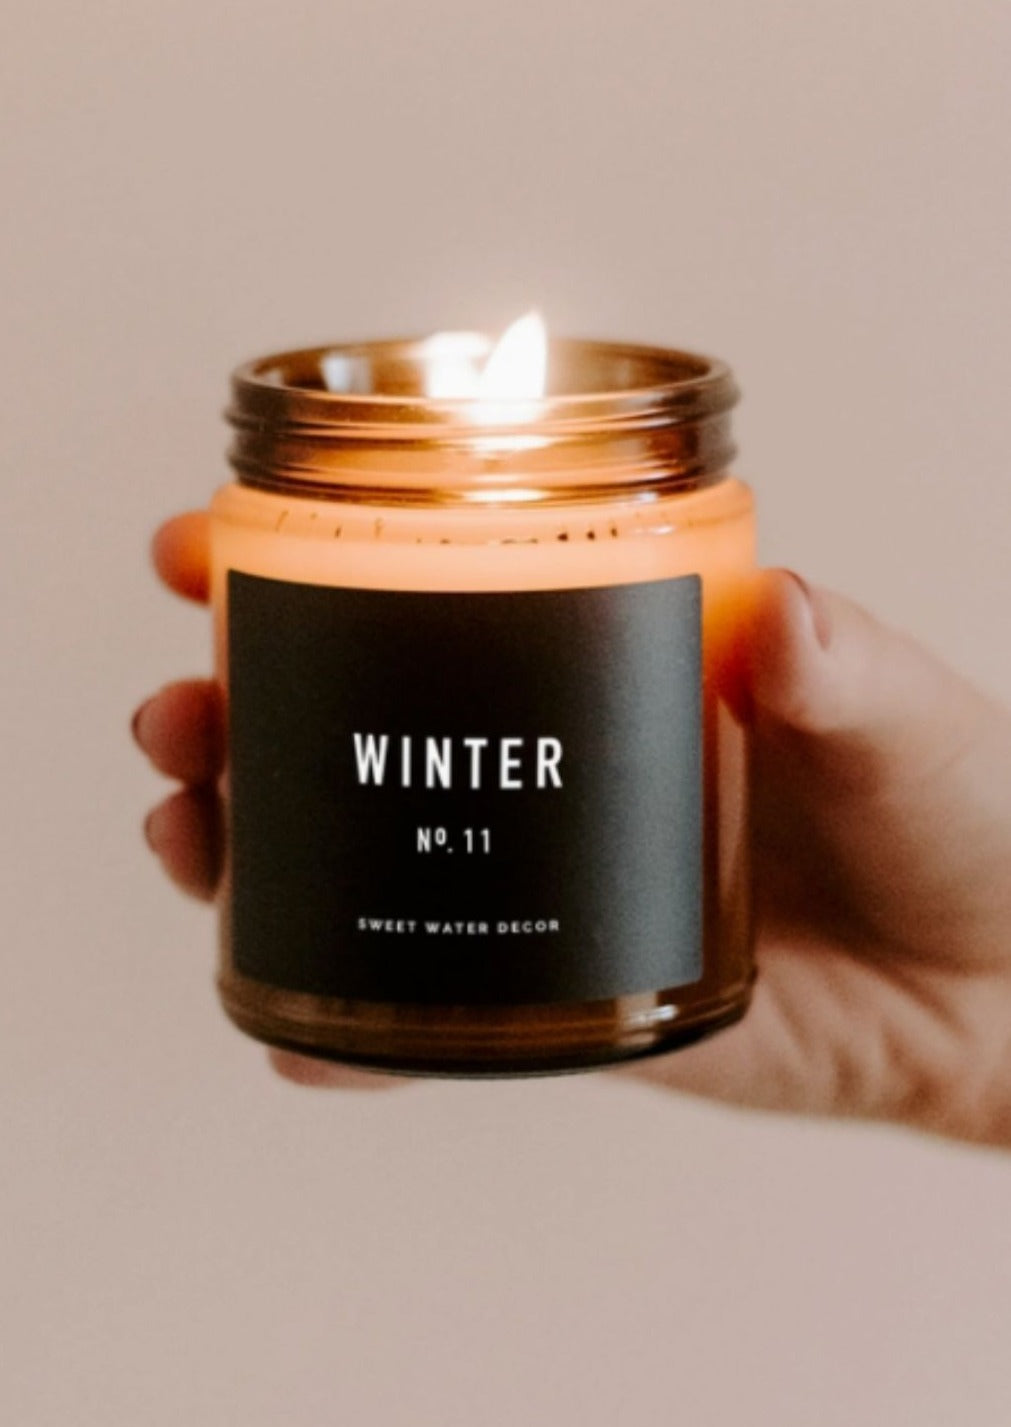 Wax and Wool Soy Candle — Starlight Knitting Society